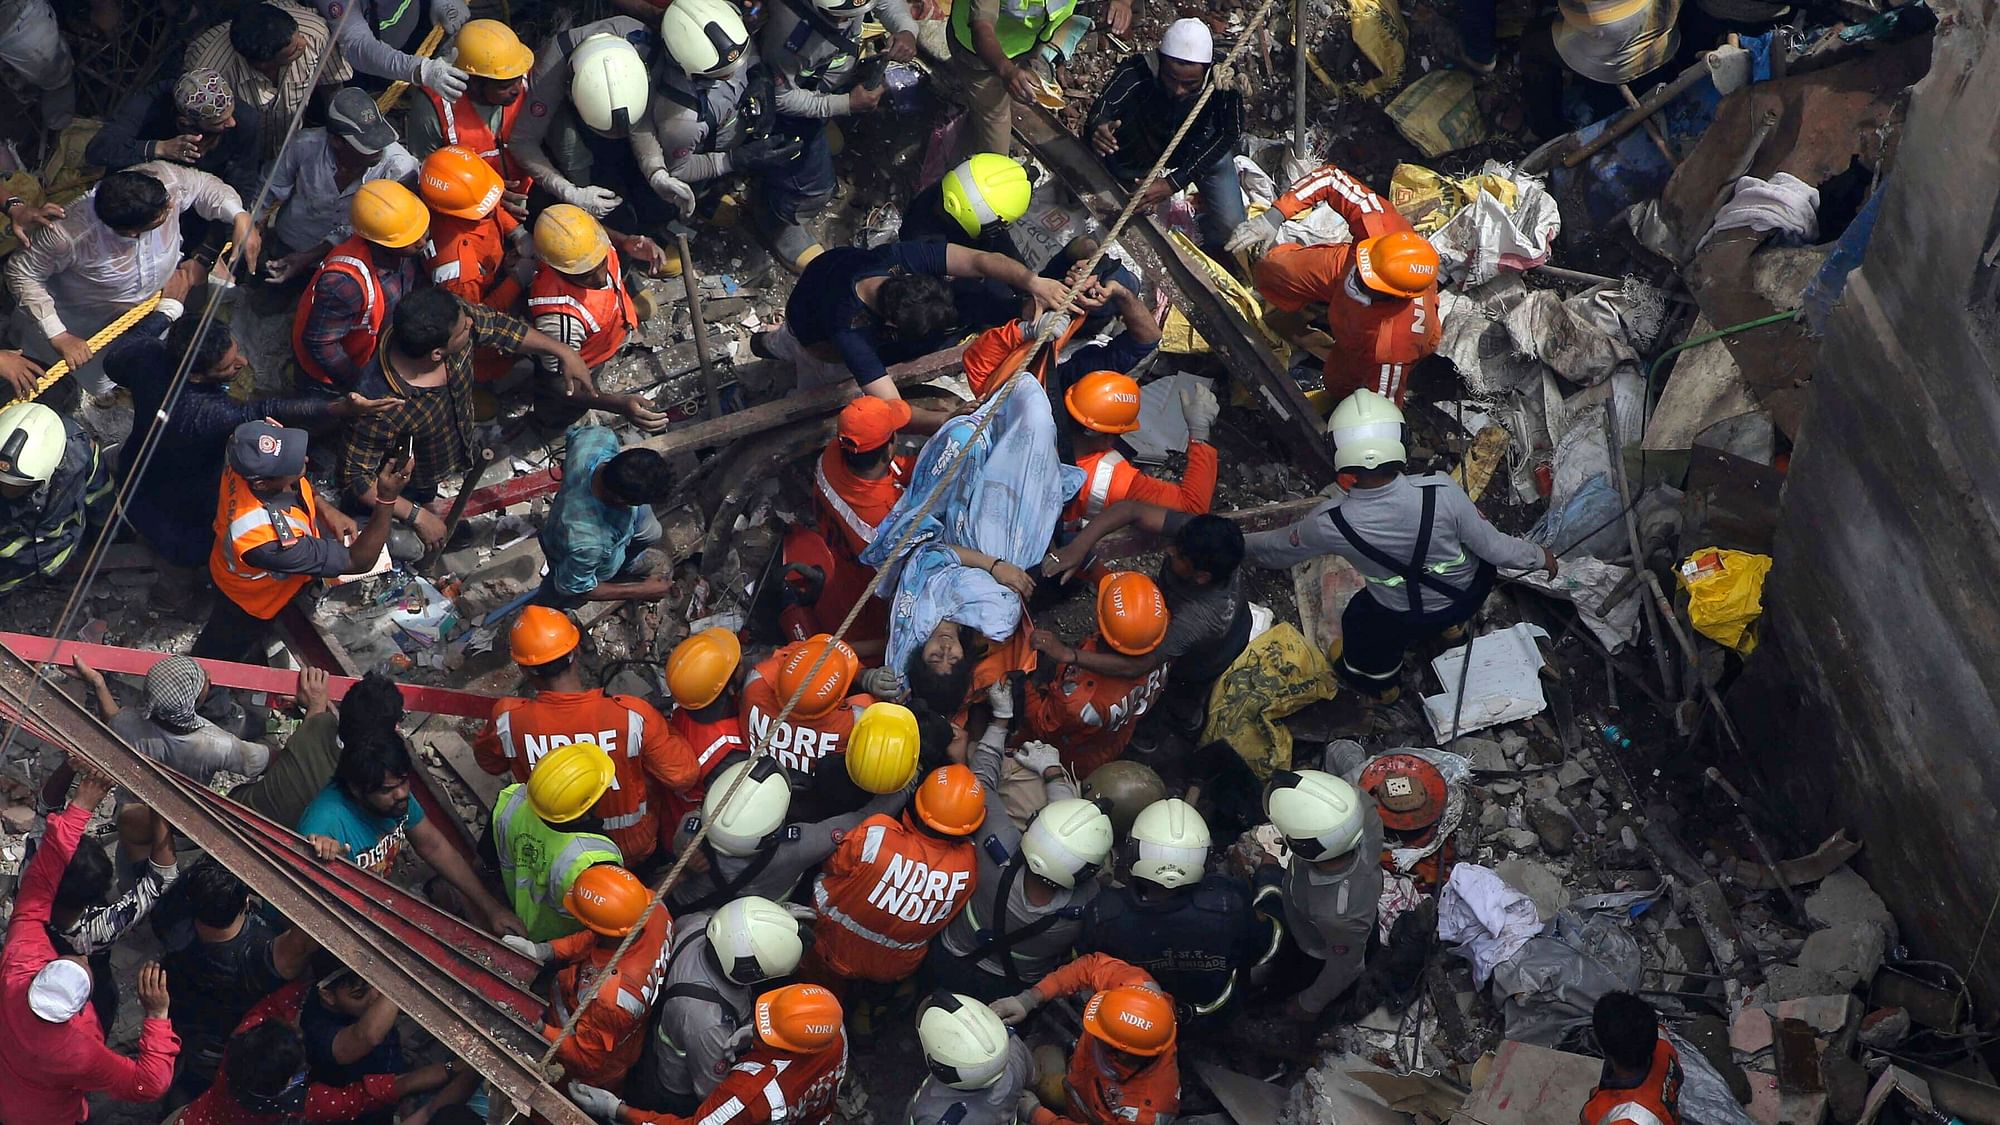 About 40 to 50 people are feared trapped under the debris of the Dongri building that collapsed on Tuesday morning.